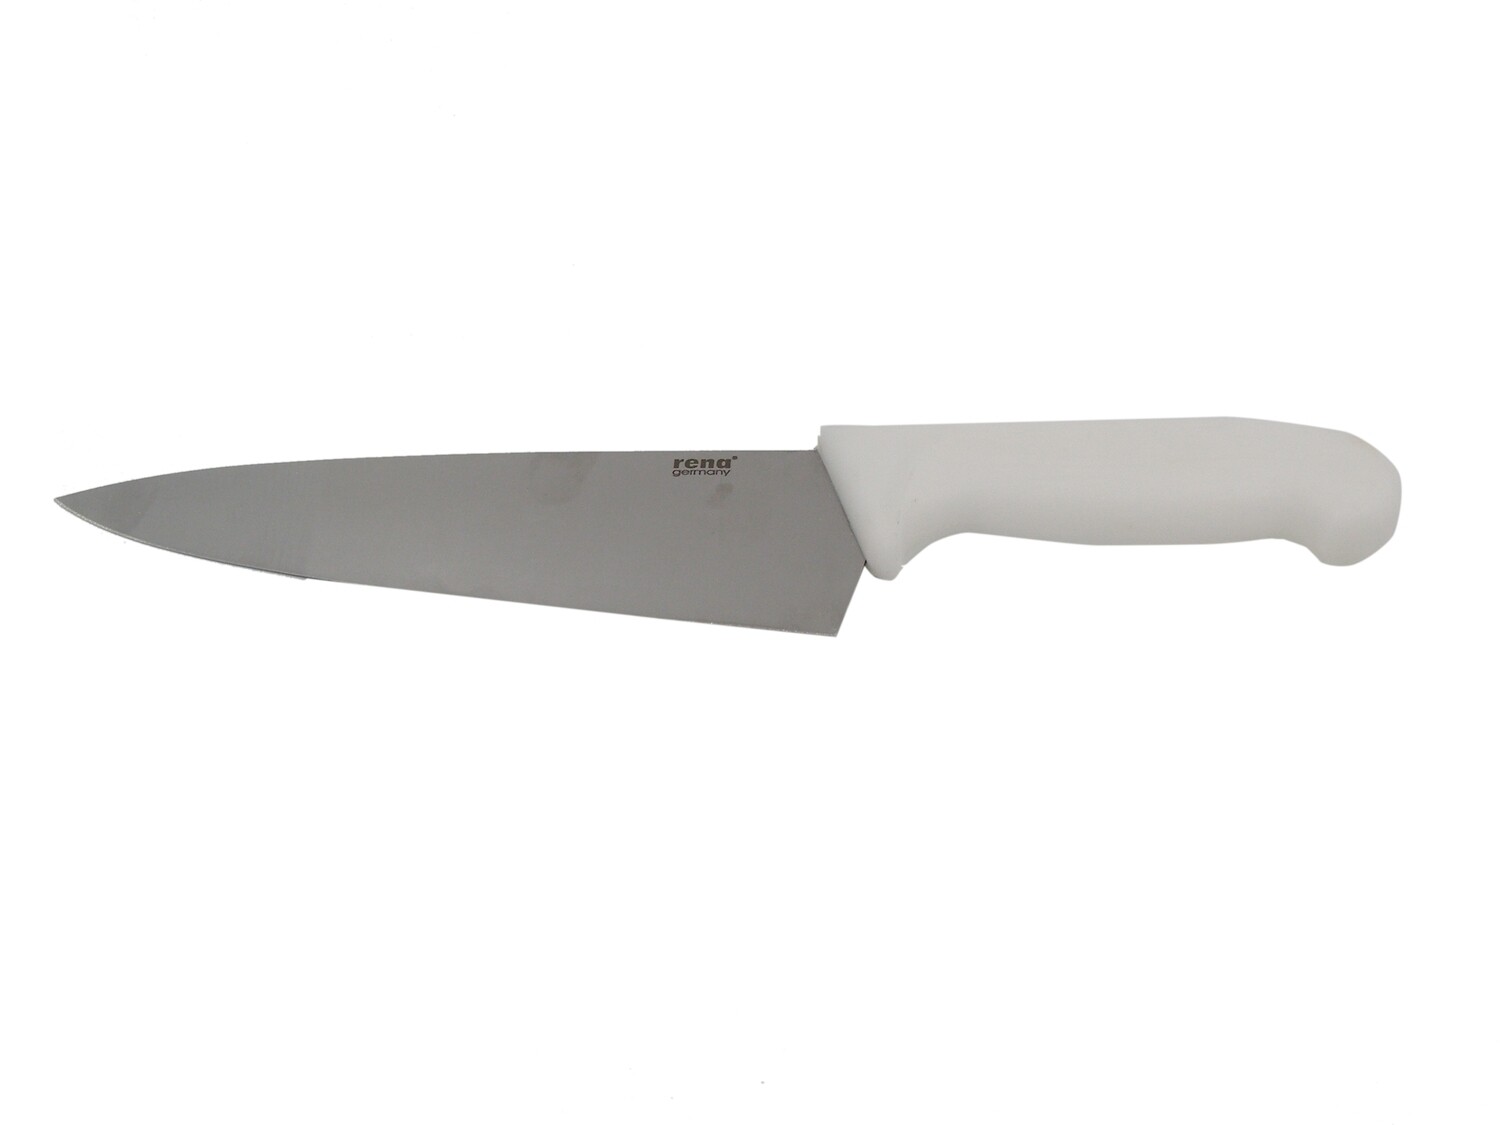 WELCOME RENA 8" WHITE CHEF KNIFE 210MM 11231RO-W